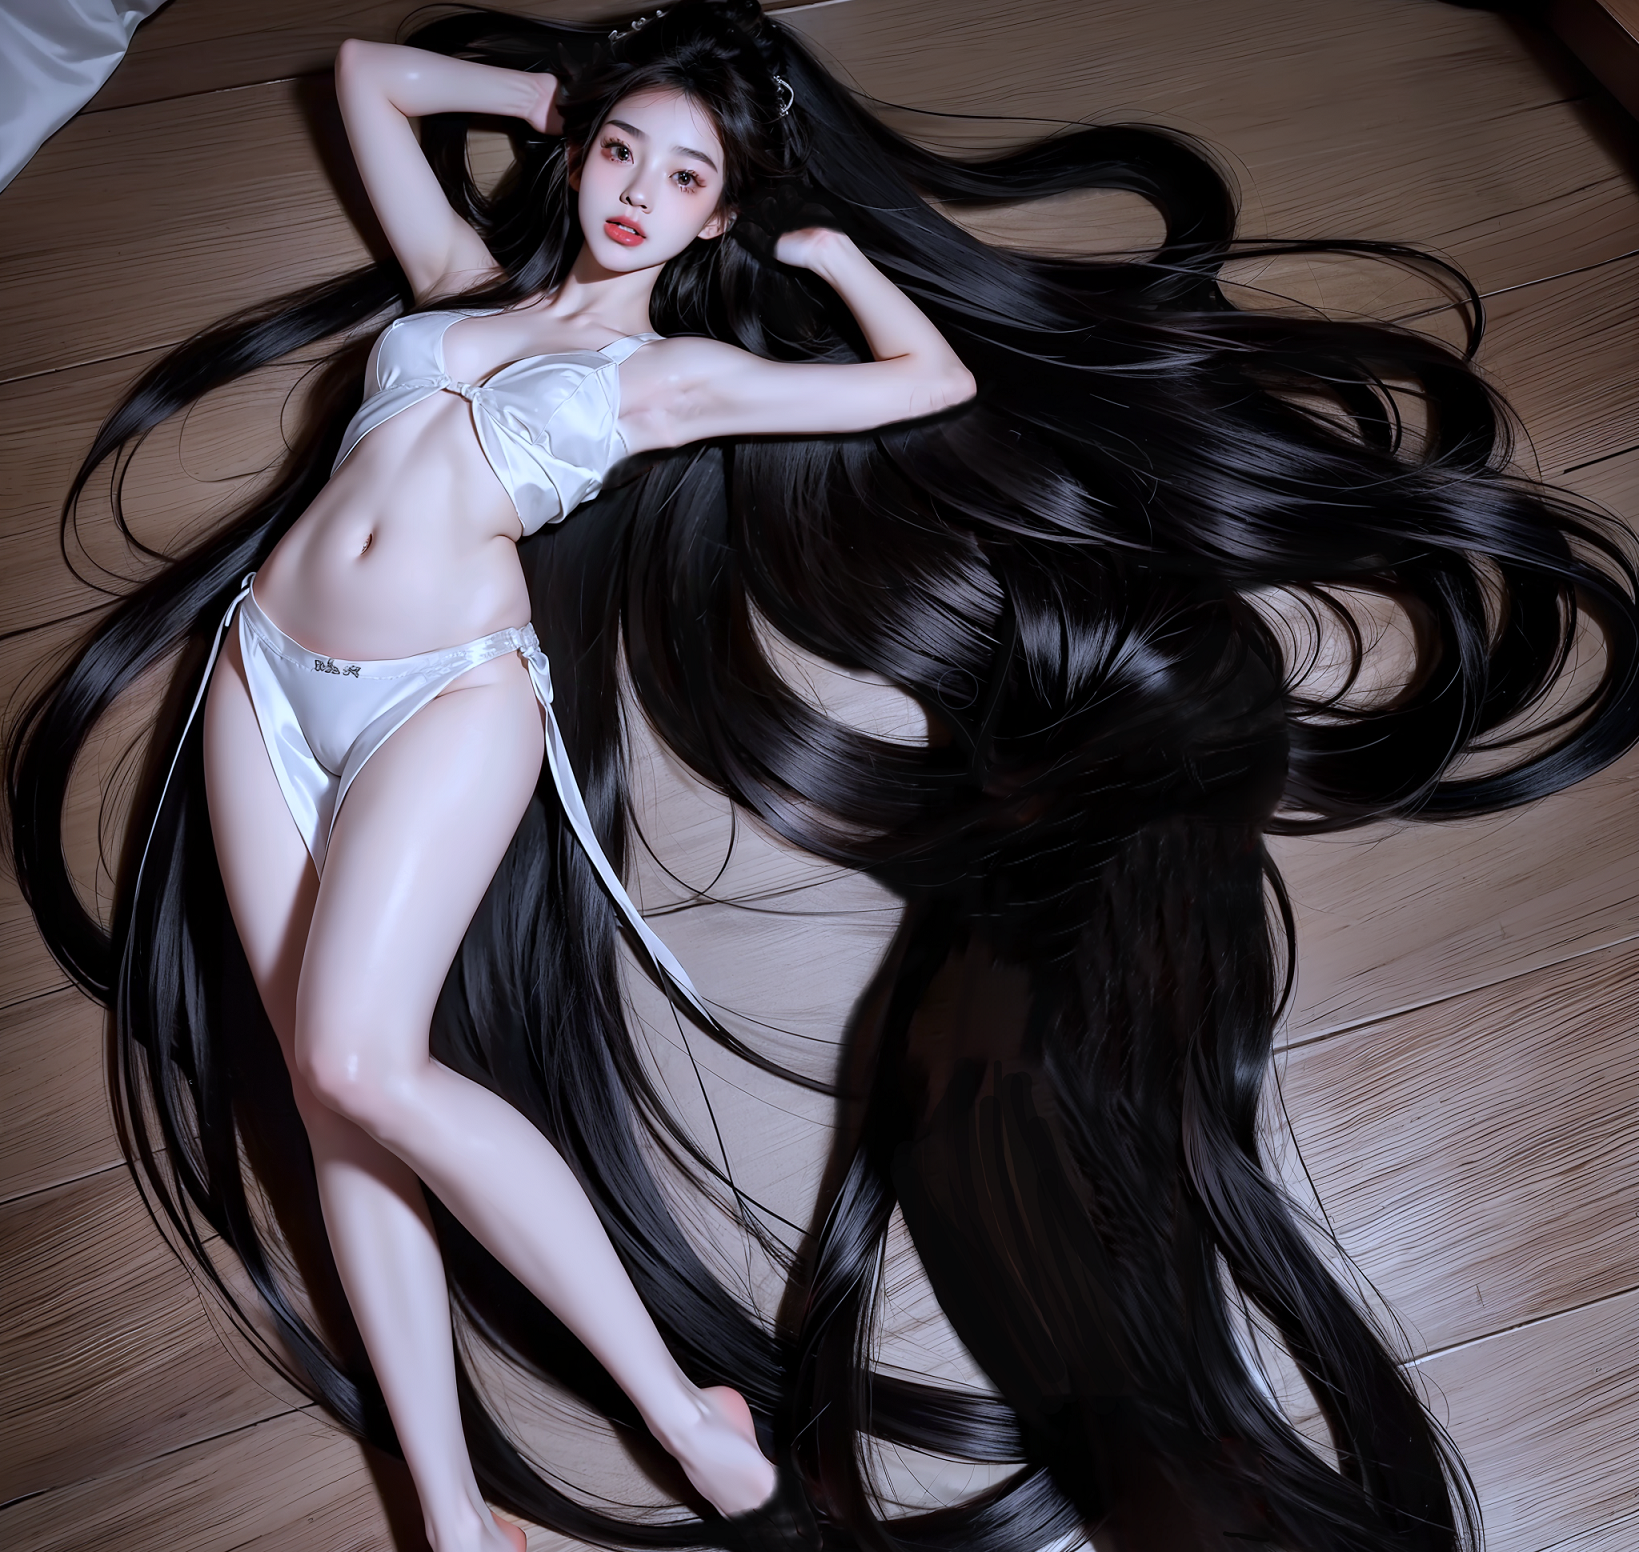 Female,Super long hair beauty. Since she was praised for her beautiful black hair when she was young, she takes great care of growing it. With her long, beautiful hair and cute face, she captivates male fans with a super long hair fetish.